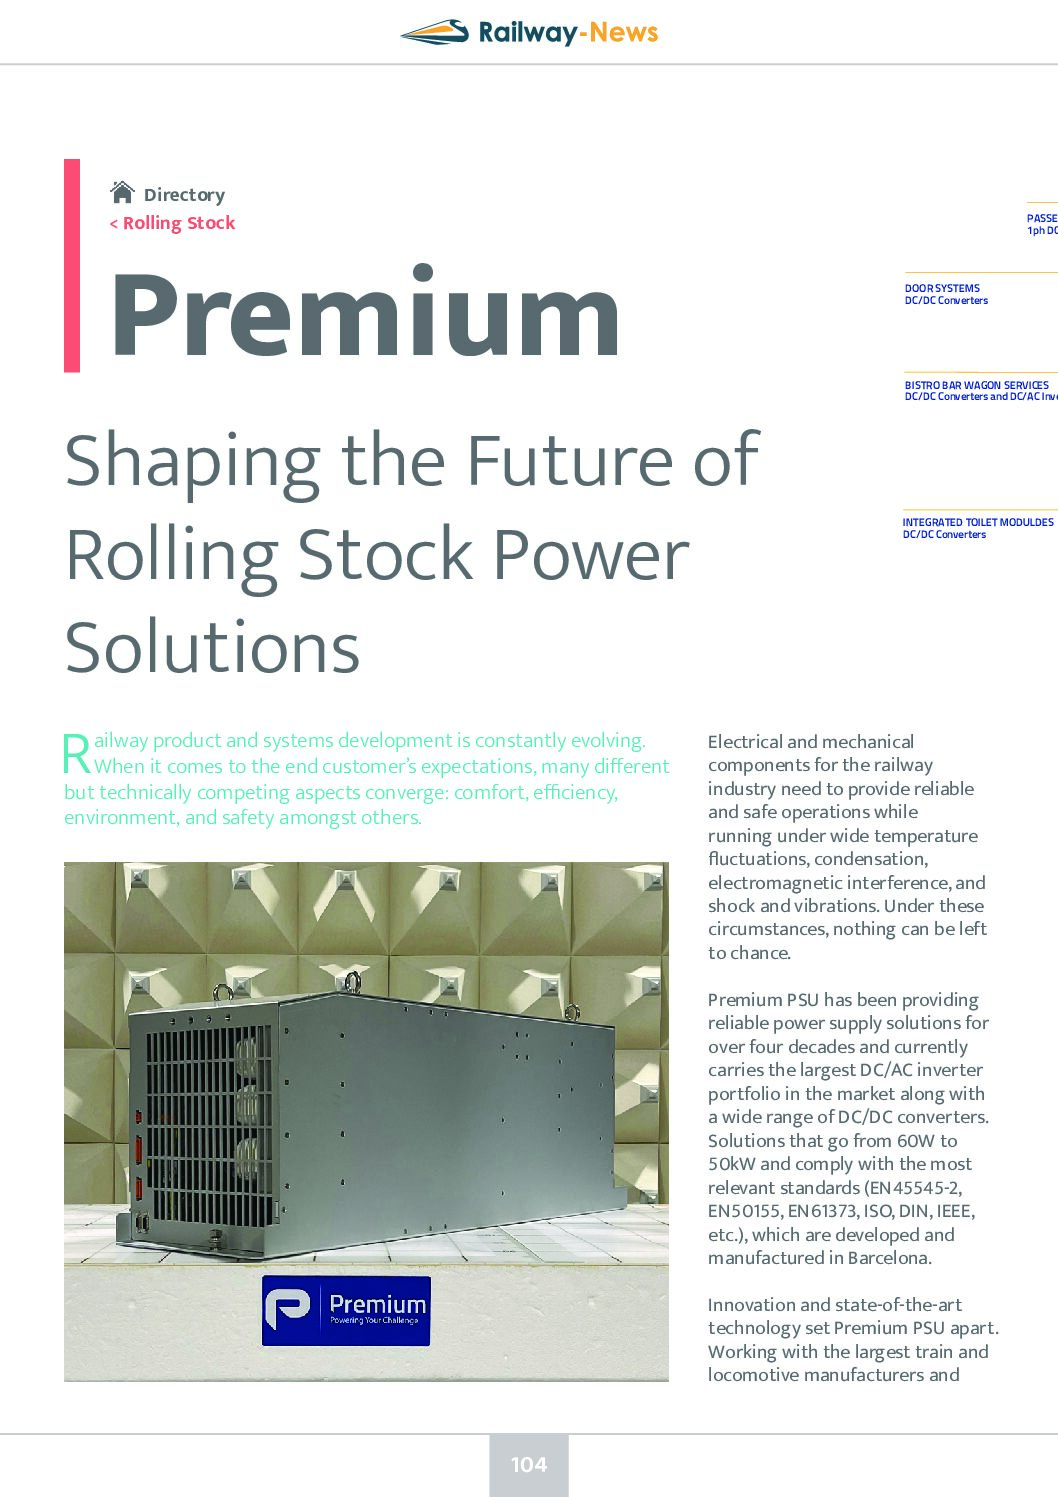 Premium – Shaping the Future of Rolling Stock Power Solutions